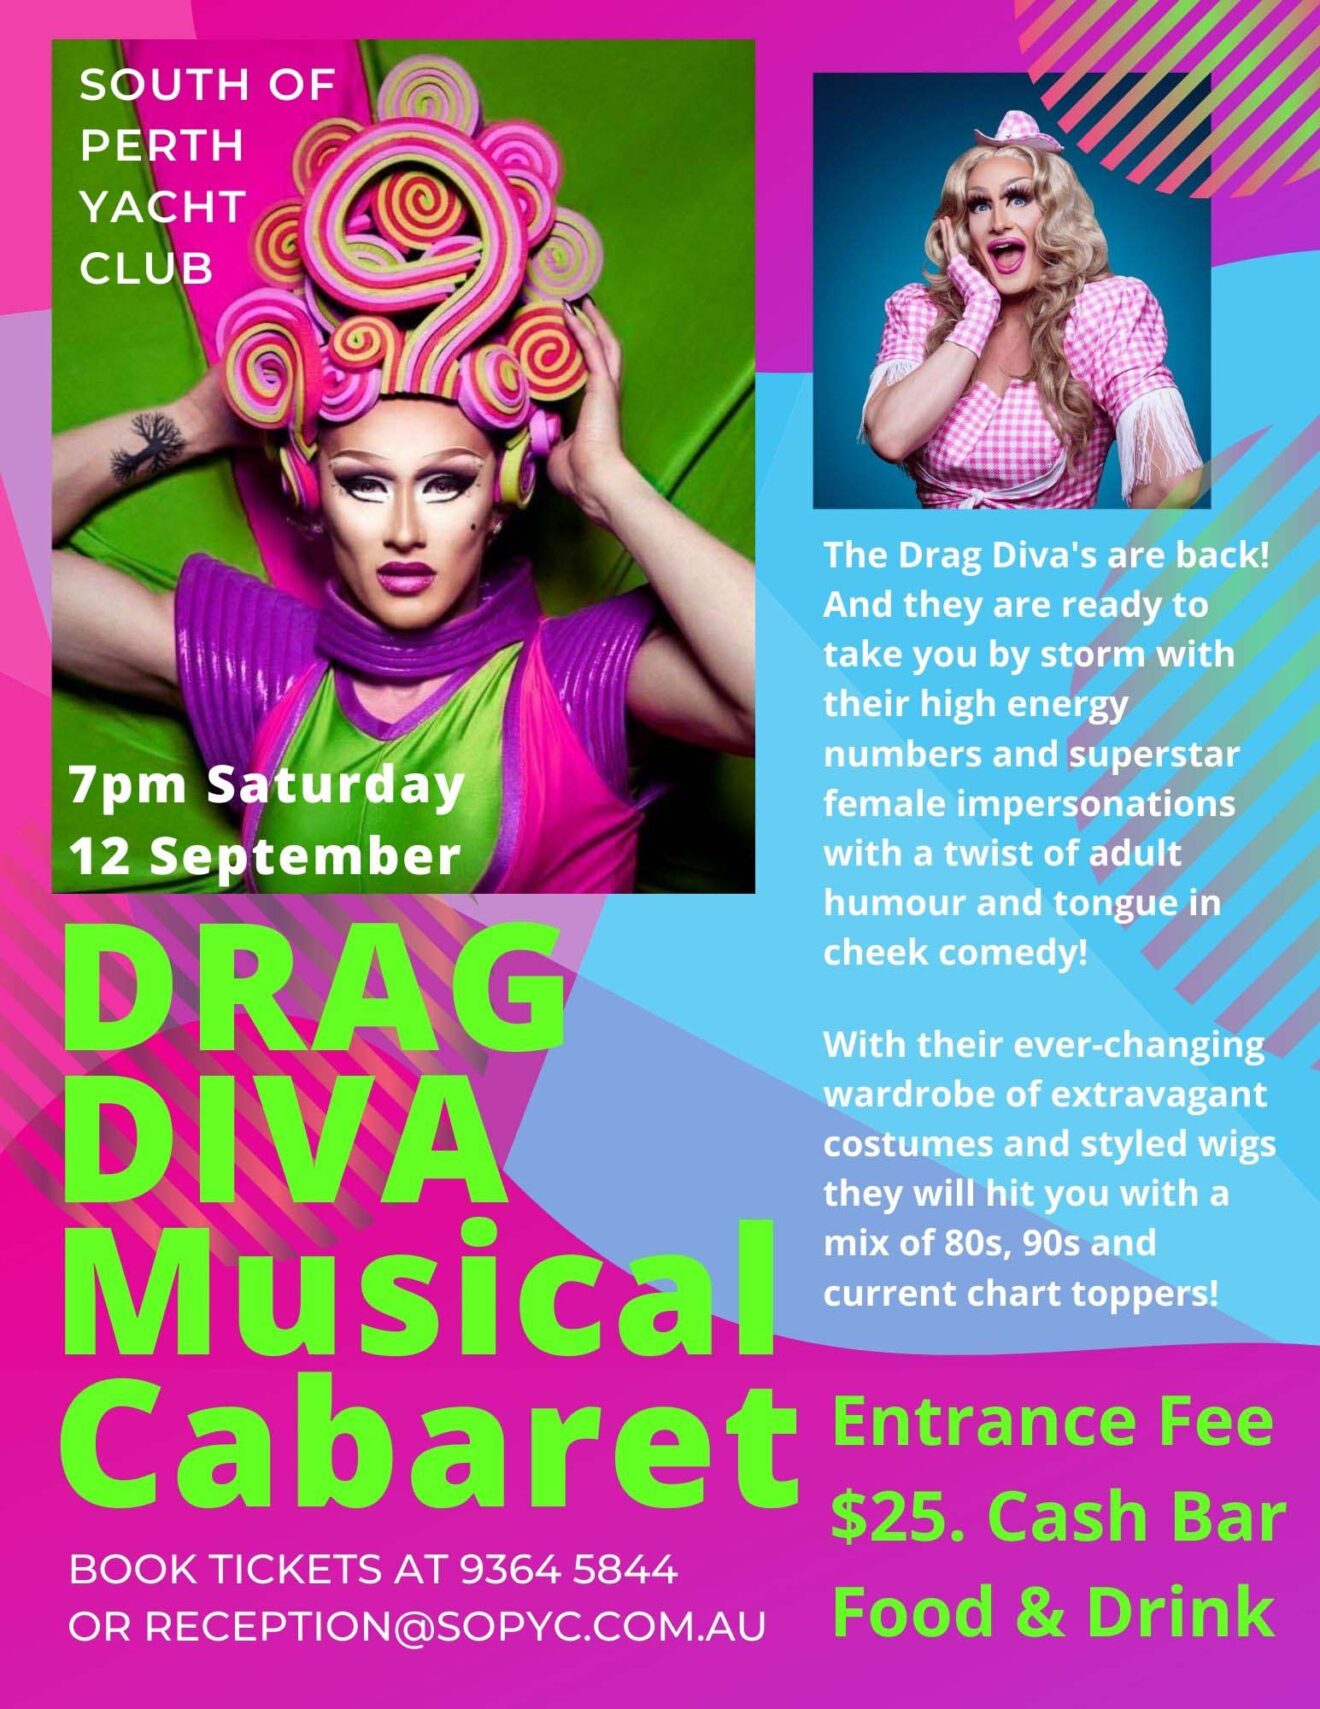 The Drag Diva's tickets - Few tickets left!